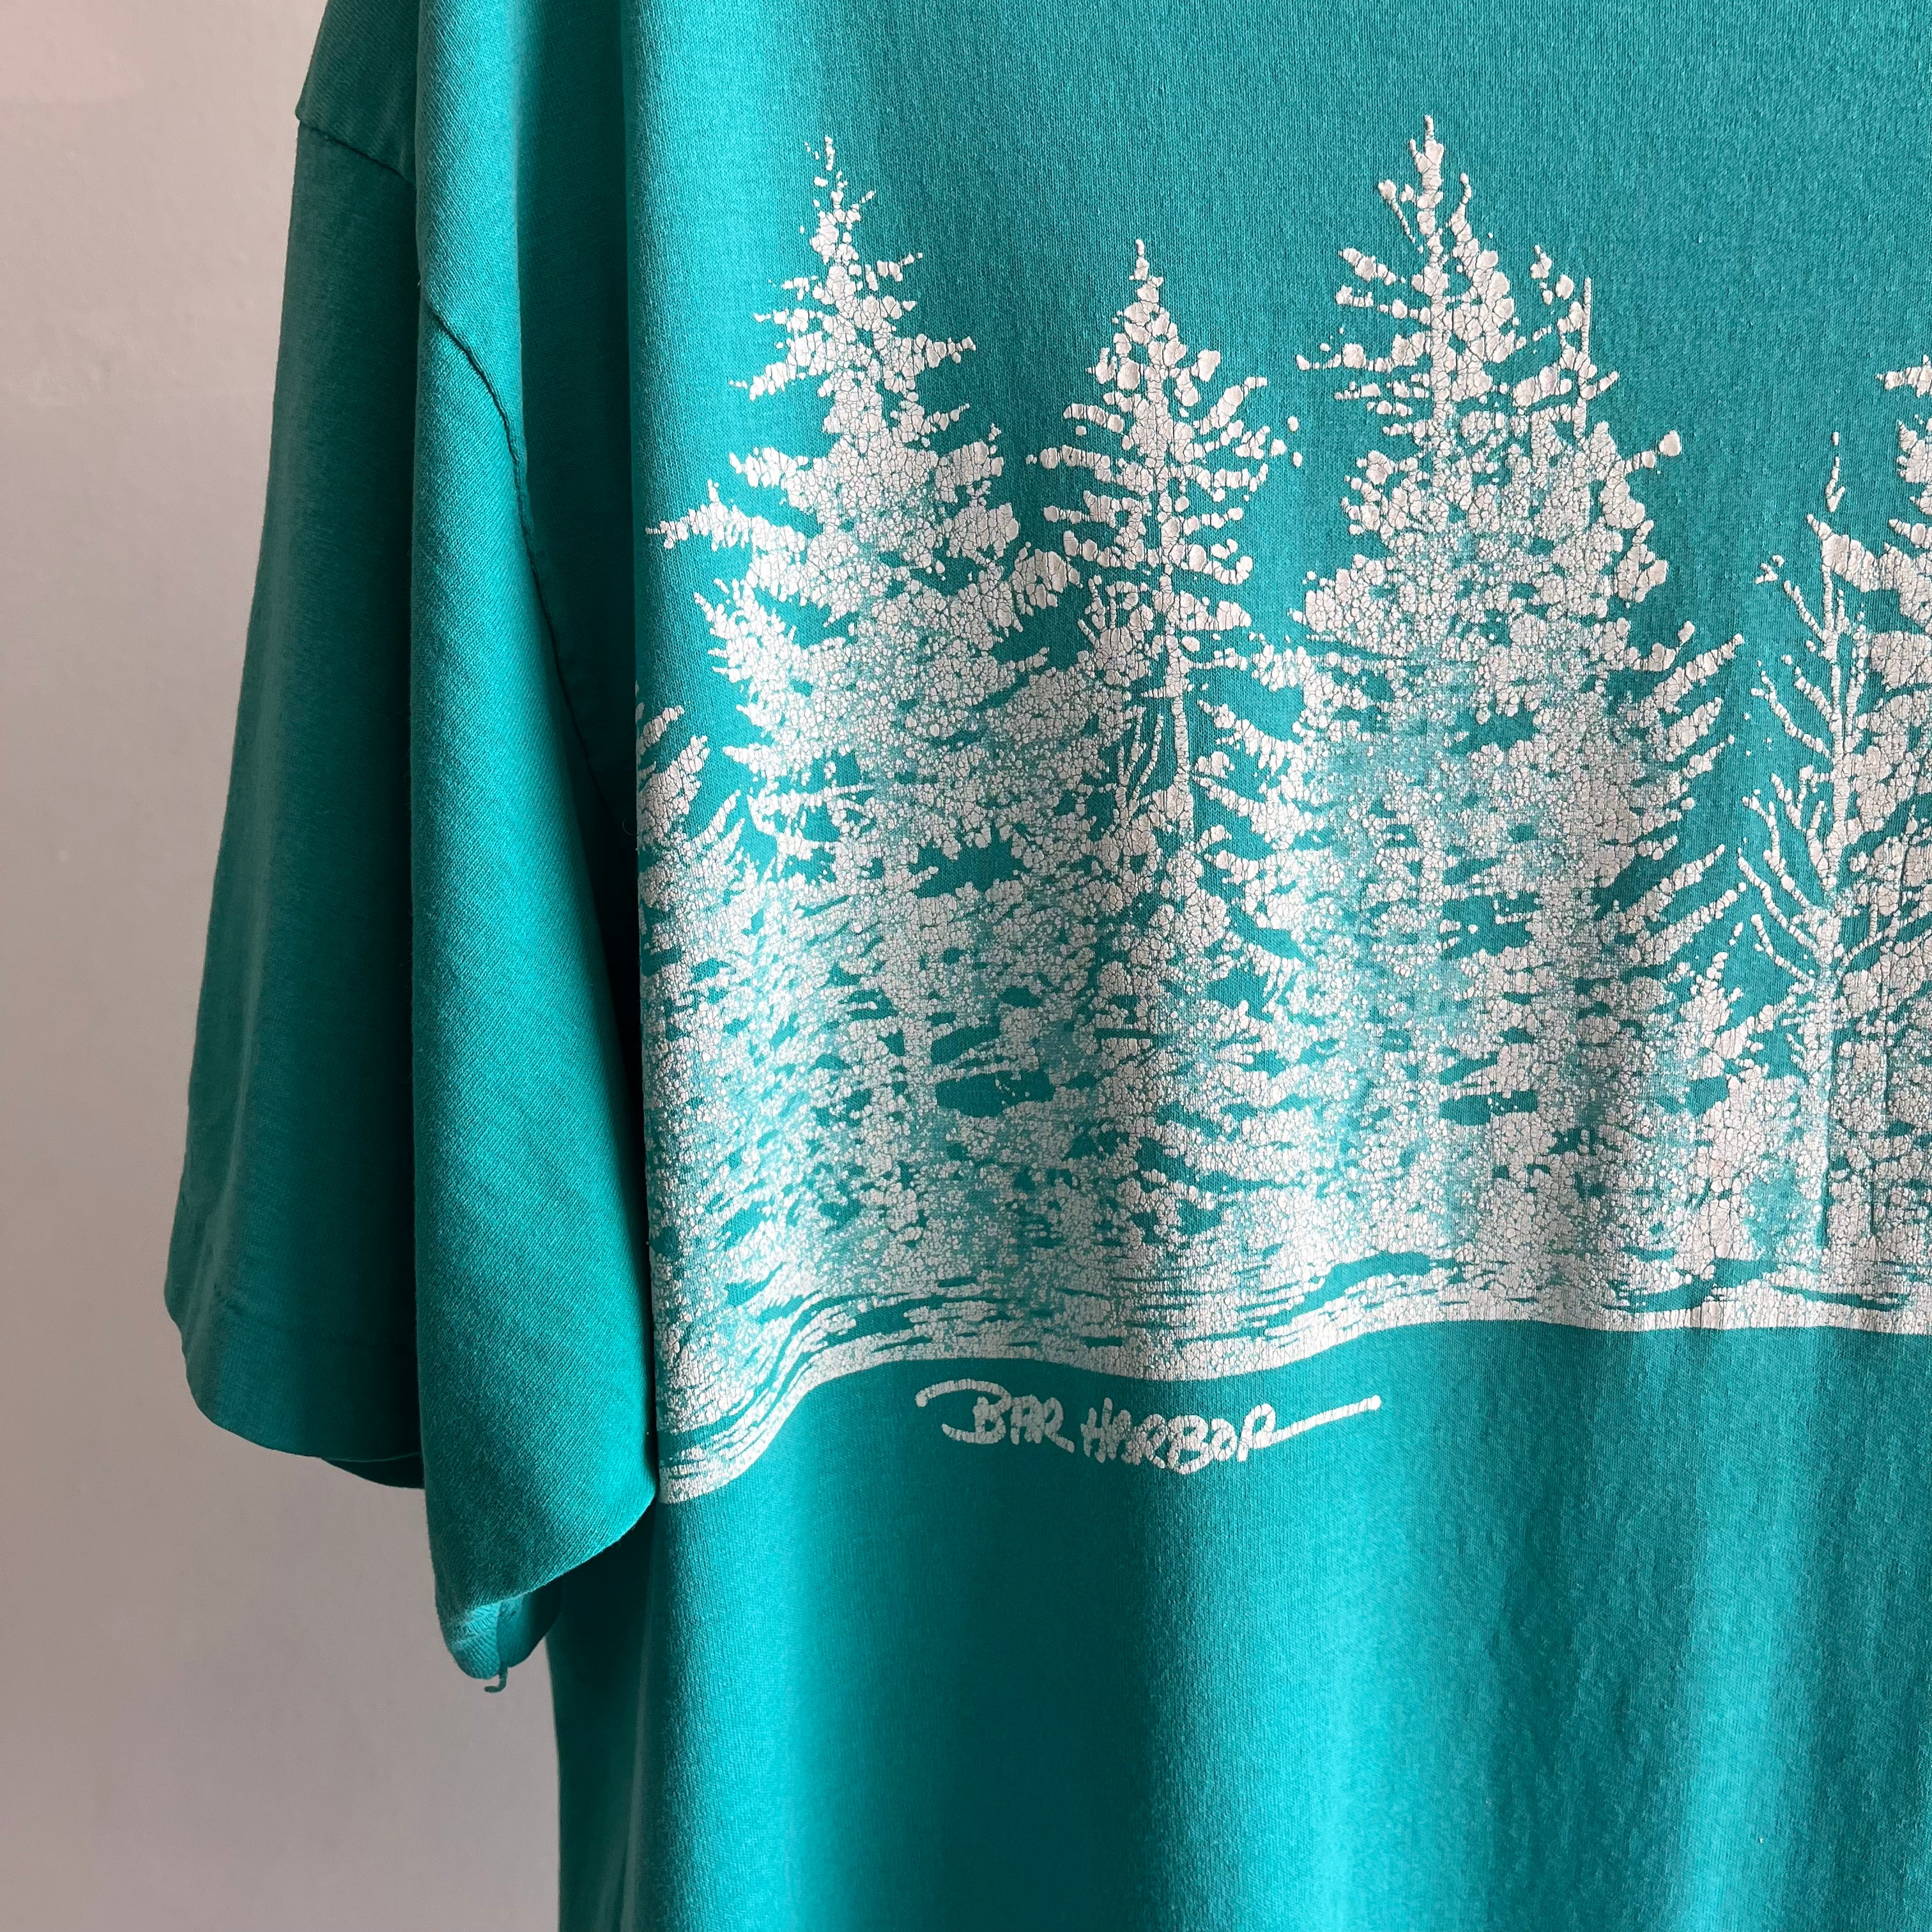 1980s Bar Harbor, Maine Tourist T-Shirt with Paint Stains